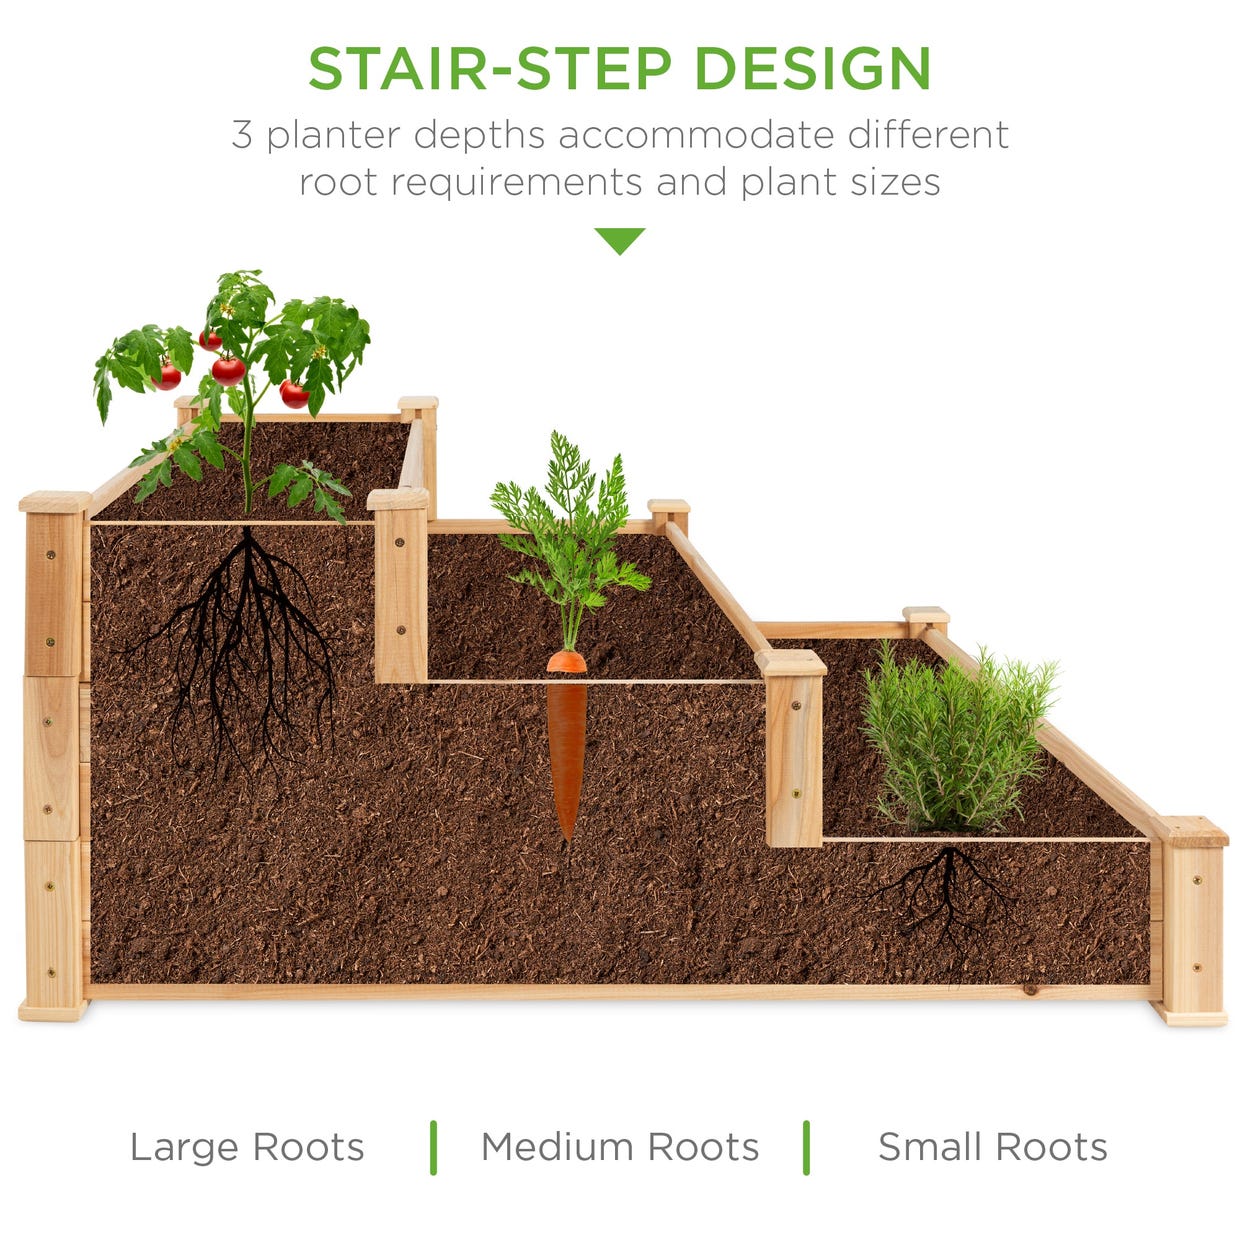 A three-tiered wooden garden bed showcasing different planter depths for varying root sizes; the tallest tier has tomato plants, the middle carrots, and the lowest rosemary.